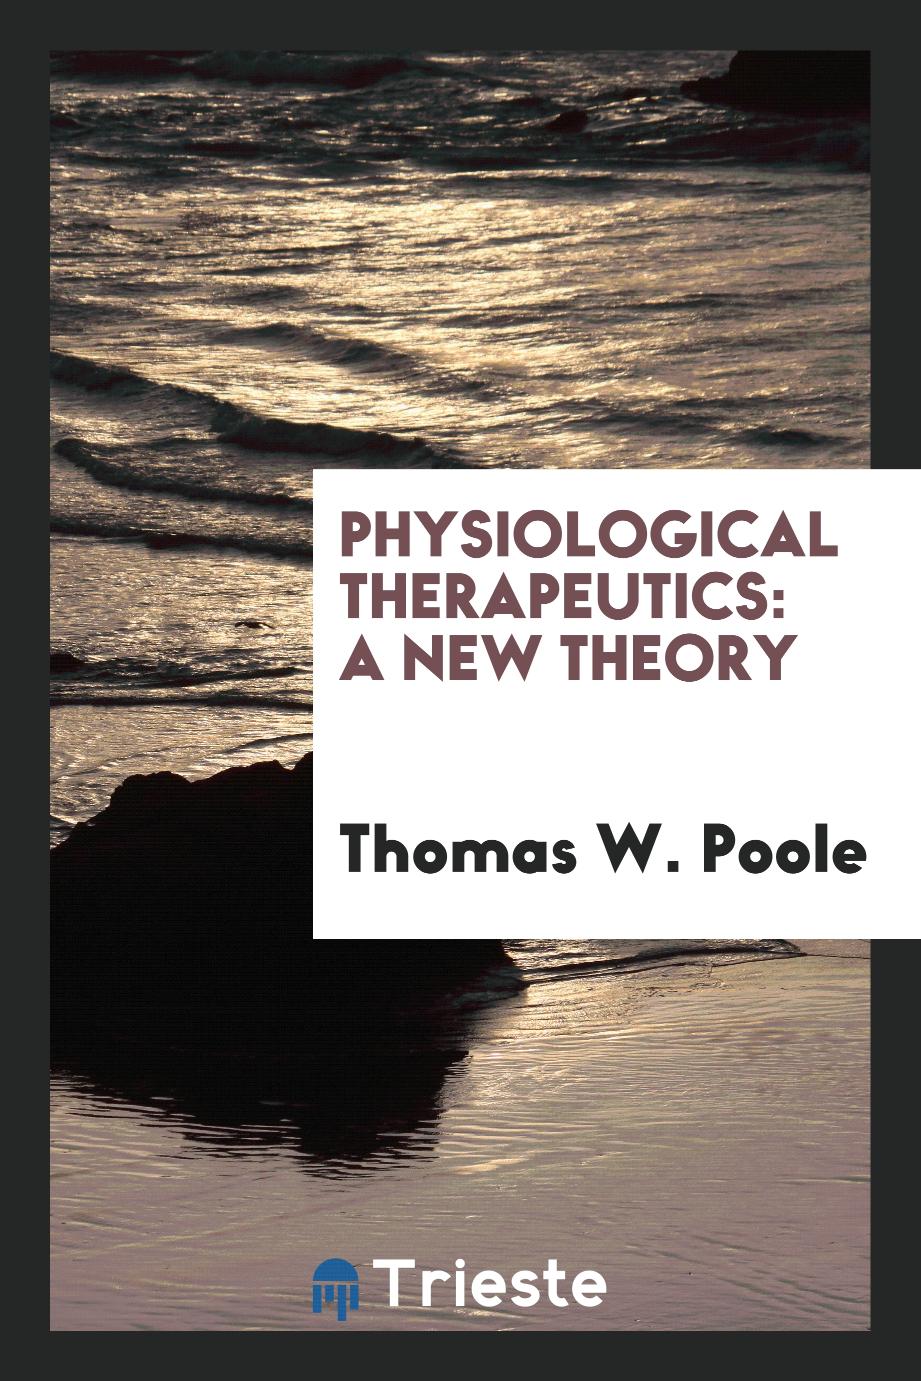 Physiological Therapeutics: A New Theory